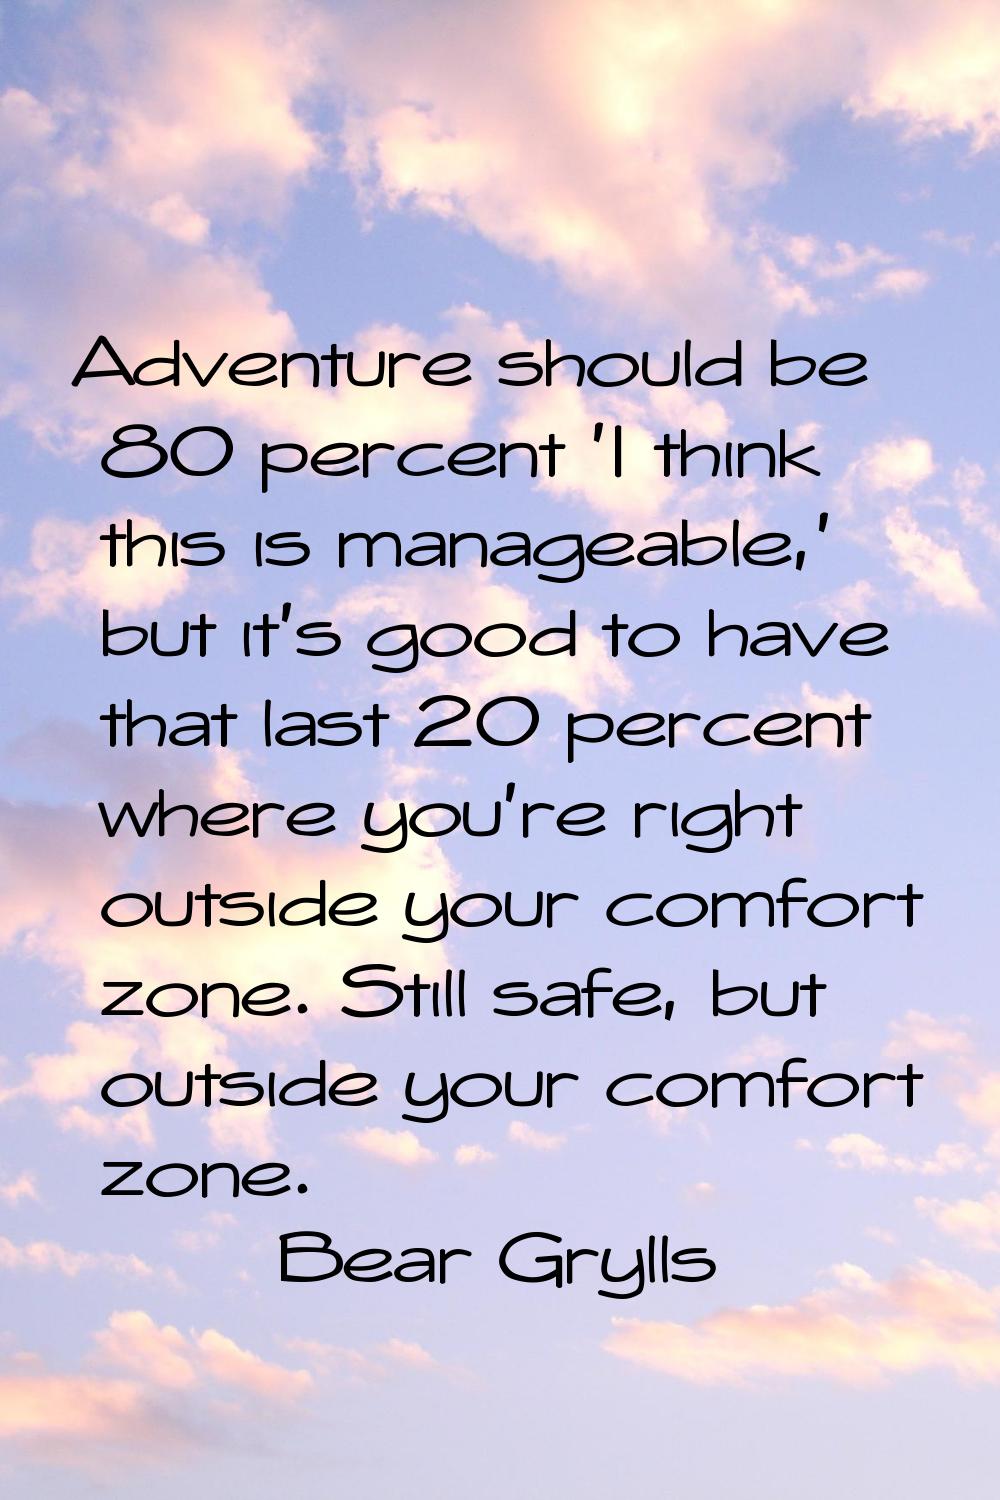 Adventure should be 80 percent 'I think this is manageable,' but it's good to have that last 20 per